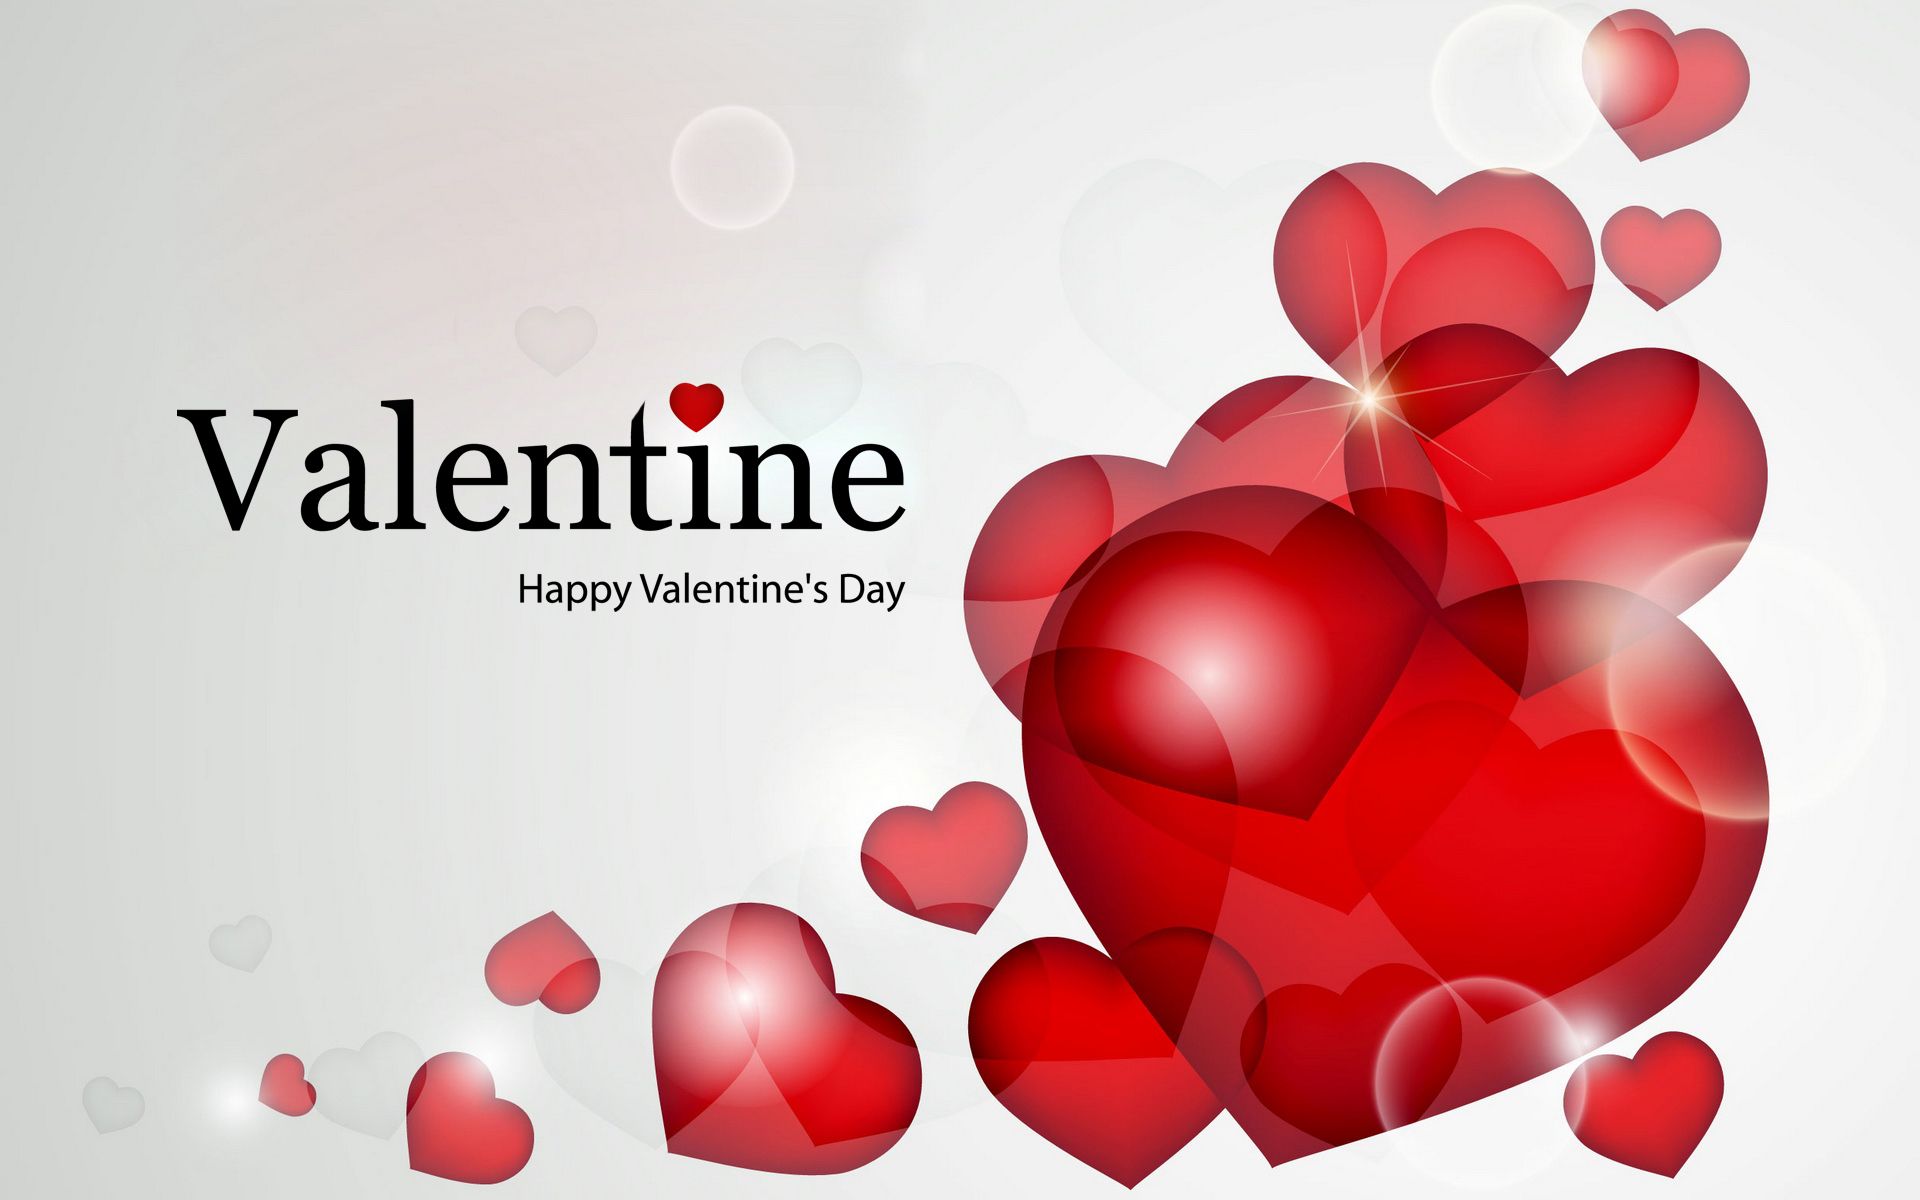 Happy Valentines Day 2016 Wallpapers For Desktop | Live HD ...